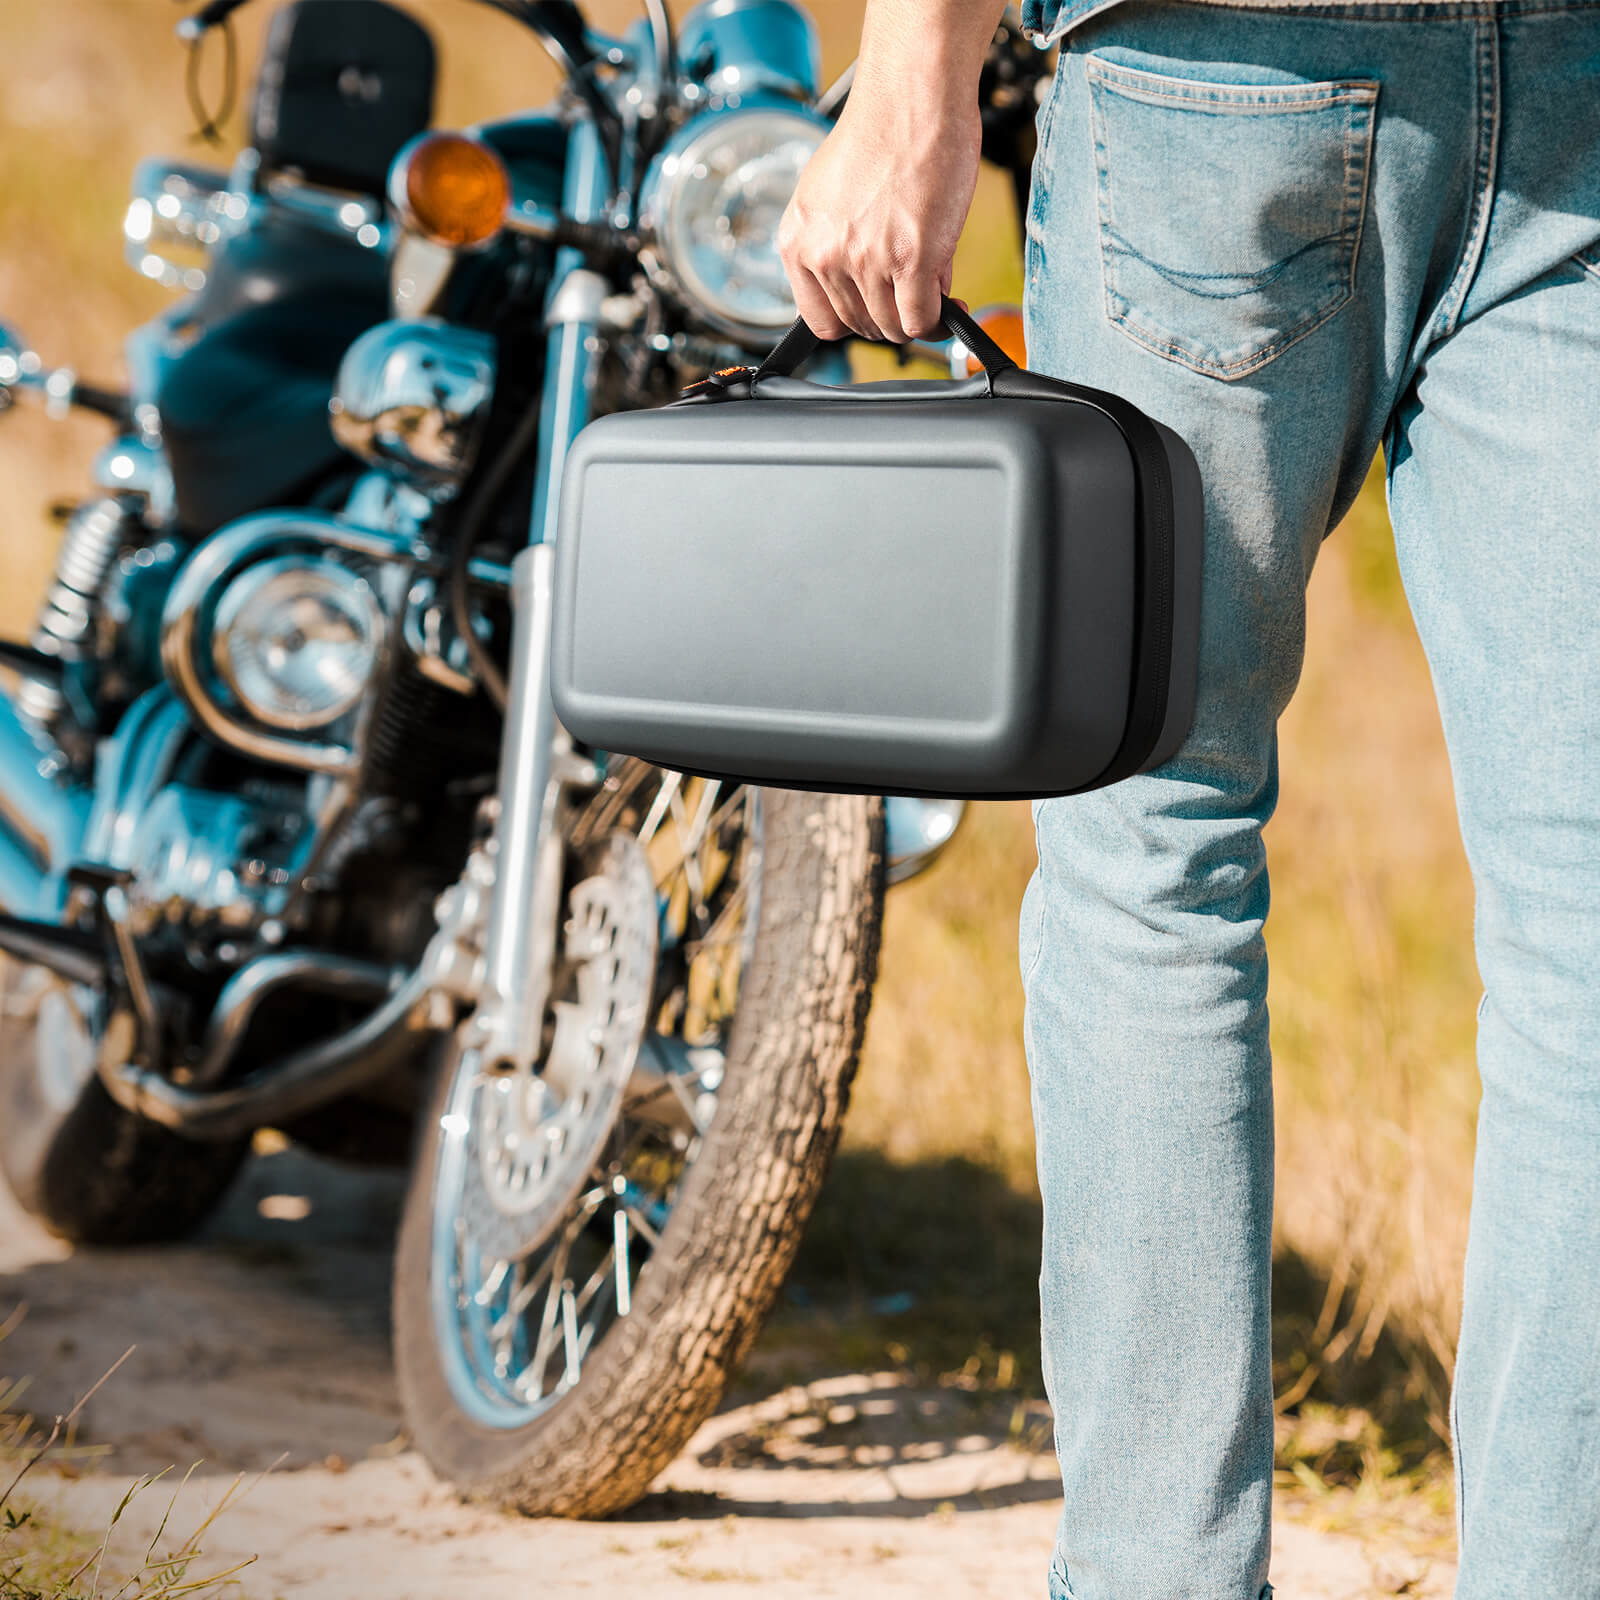 With the non-slip and comfortable handle, this portable and compact carrying case is easy to keep your T8 jump starter and accessories together and take them everywhere.